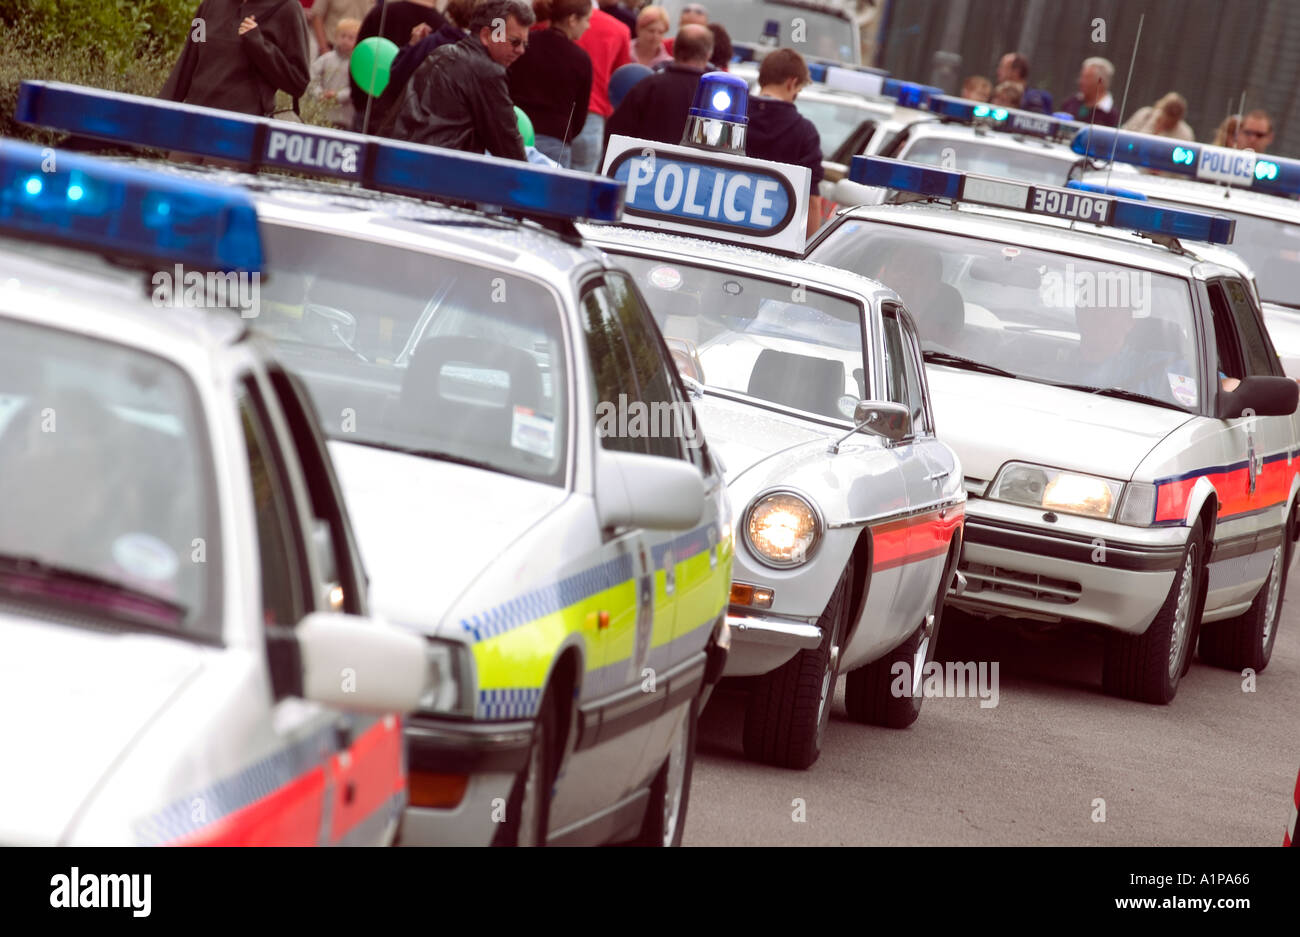 A line up of old fashioned police cars at a public event Stock Photo